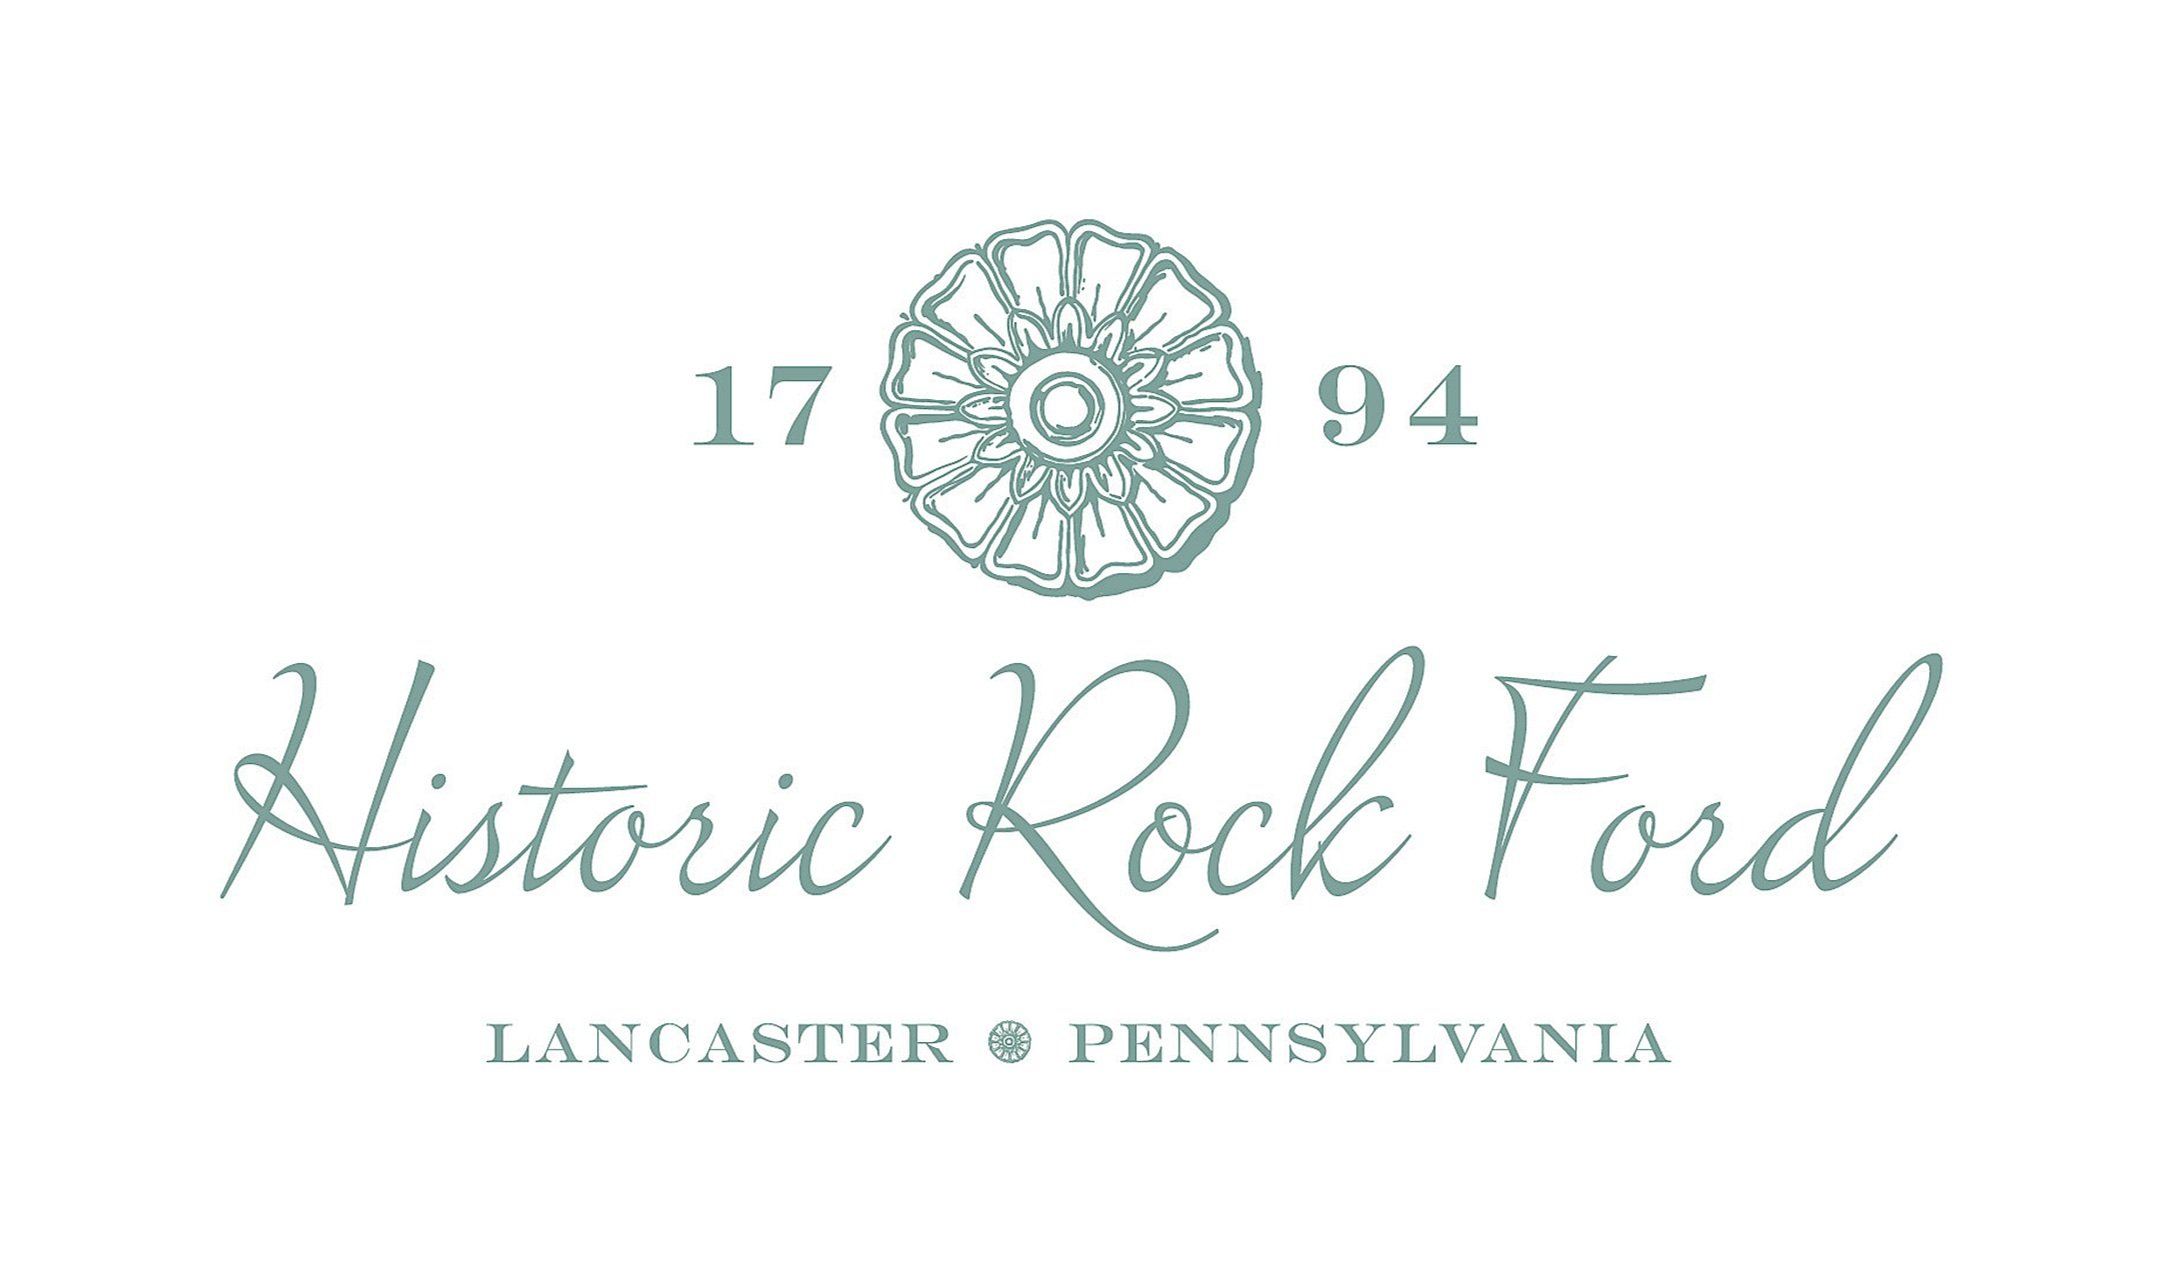 Historic Rock Ford